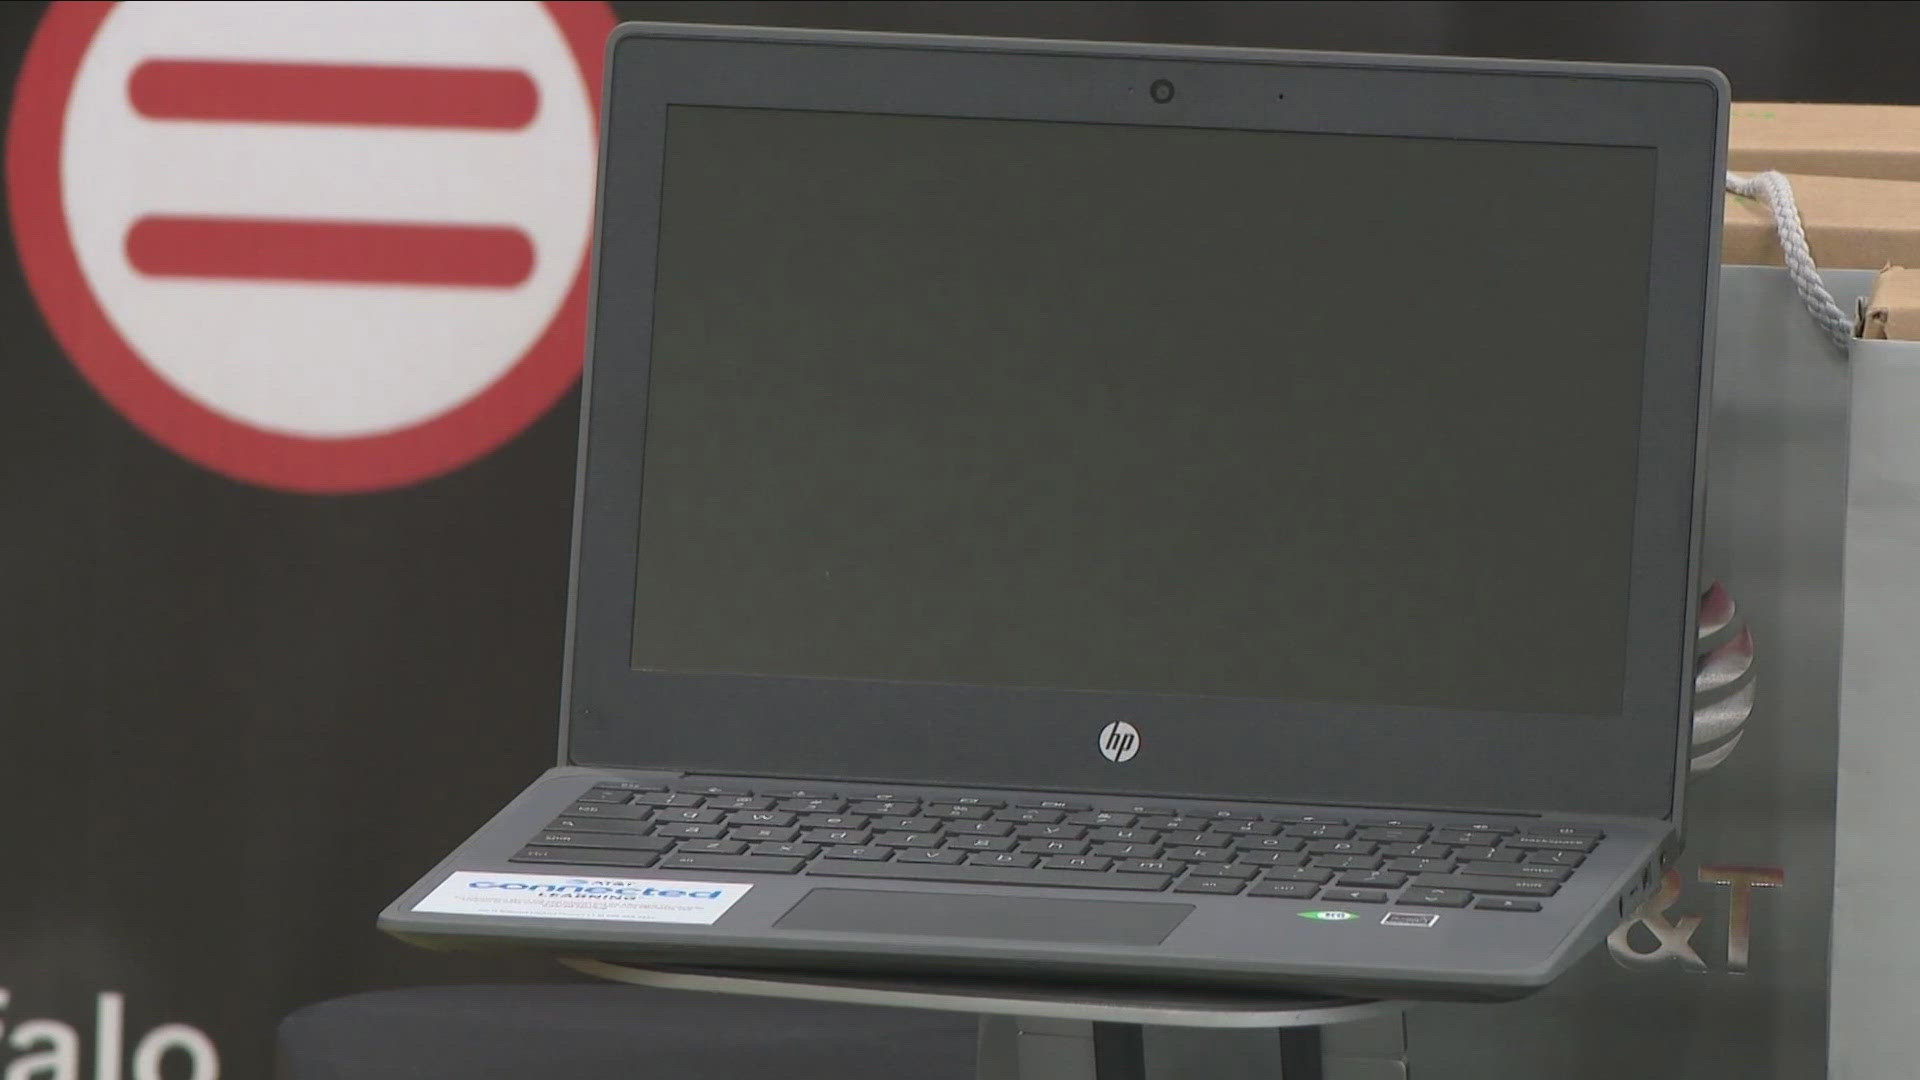 TODAY.. ONE-HUNDRED NEW LAPTOPS WERE DISTRIBUTED TO TEN LOCAL ORGANIZATIONS ON BUFFALO'S WEST SIDE